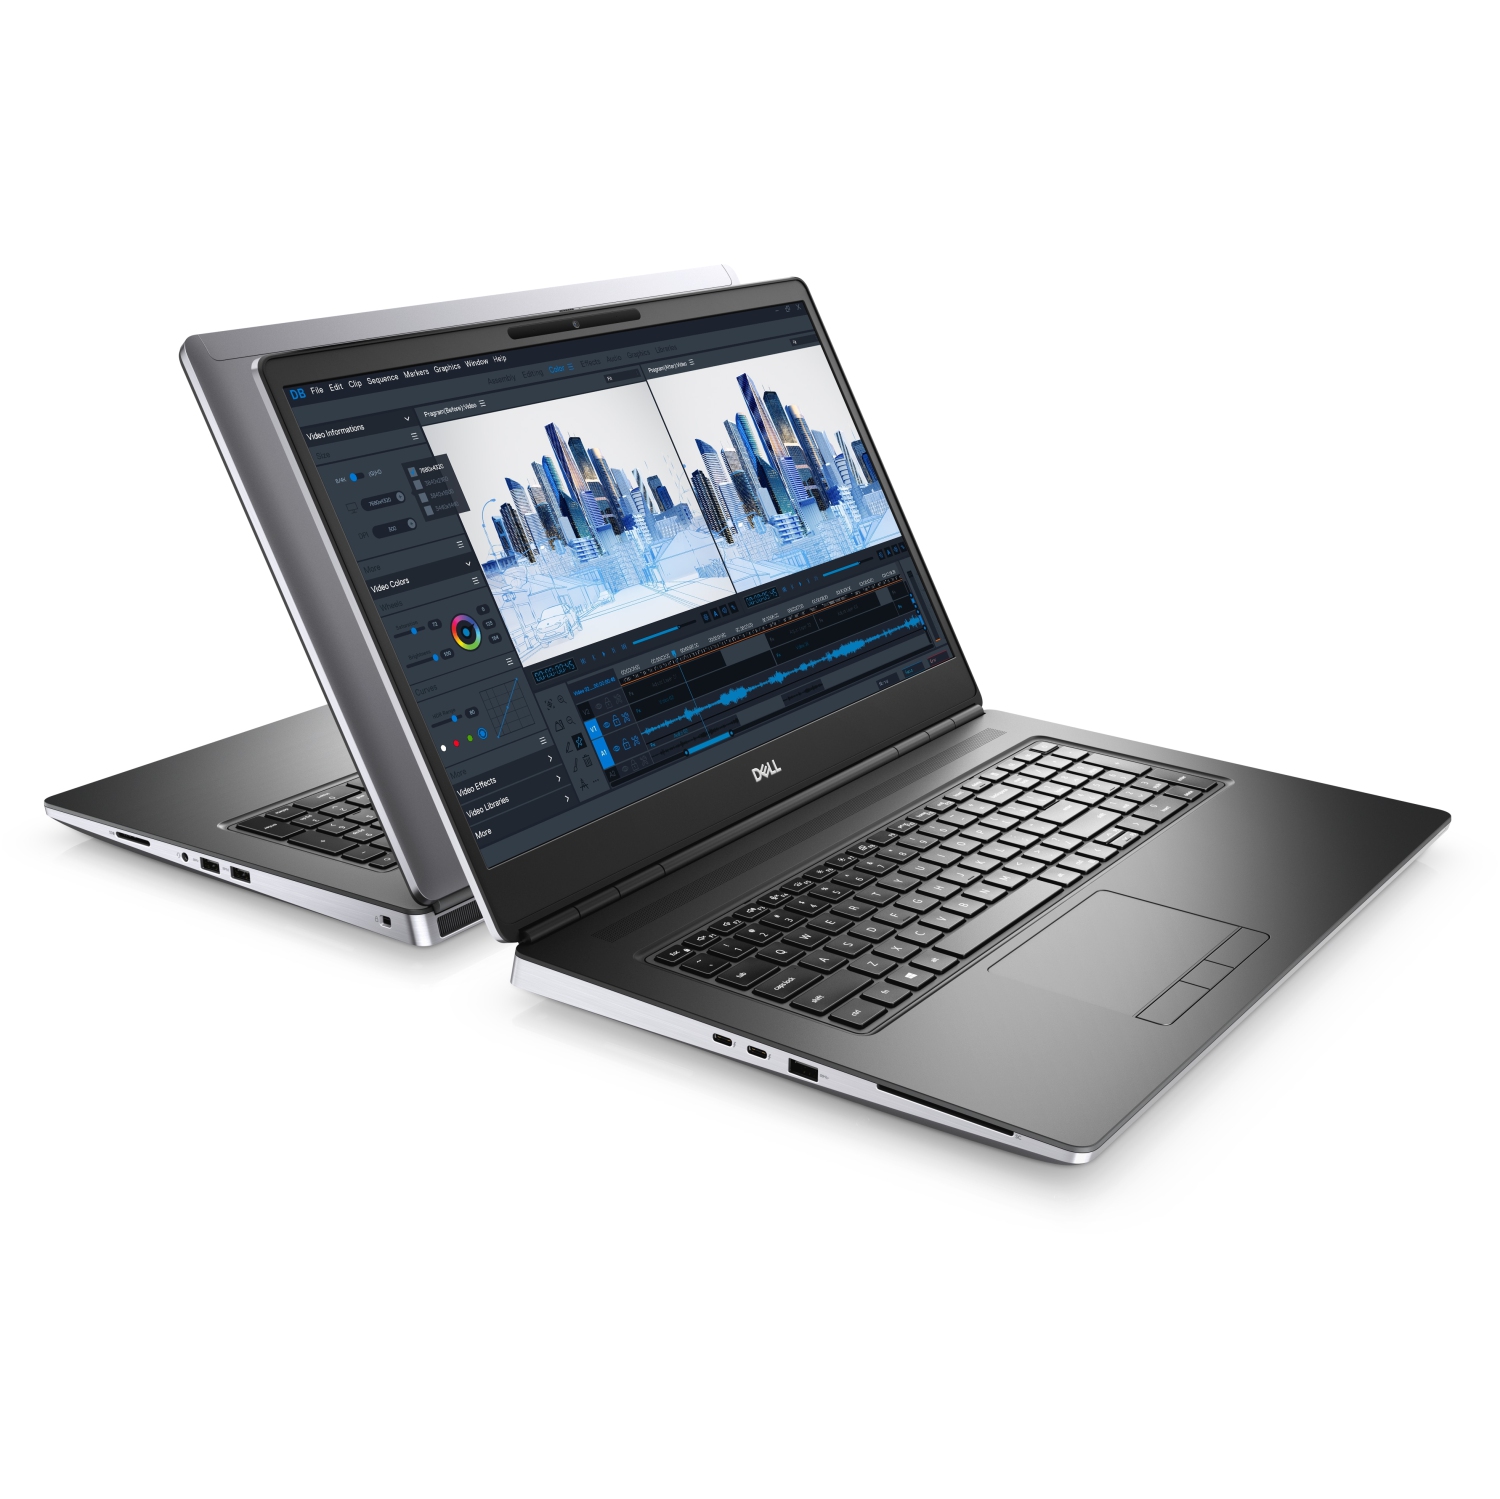 Refurbished (Excellent) - Dell Precision 7000 7760 Workstation Laptop (2021), 17.3" FHD, Core i9, 1TB SSD, 32GB RAM, RTX A4000, 8 Cores @ 5 GHz, 11th Gen CPU Certified